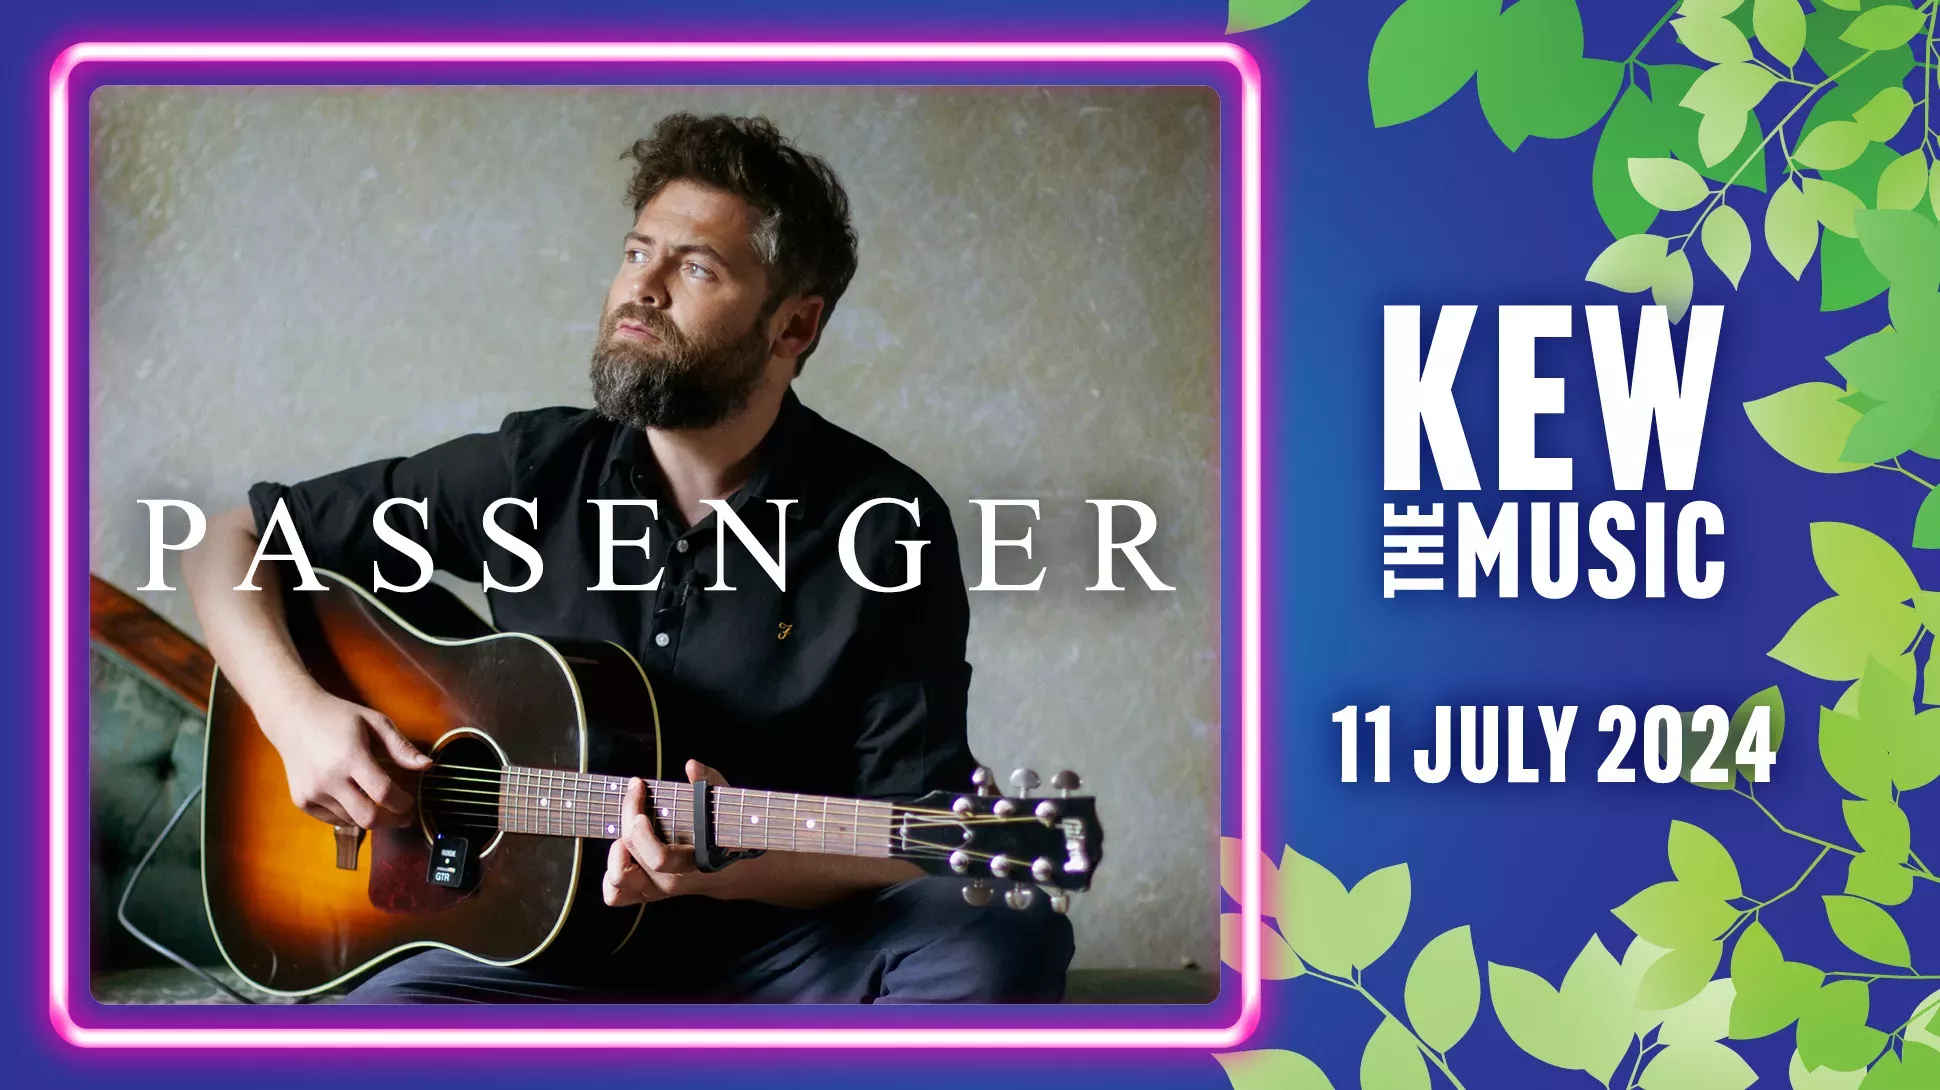 Graphic showing musician Passenger with a guitar. Text: Kew the Music 11 July 2024